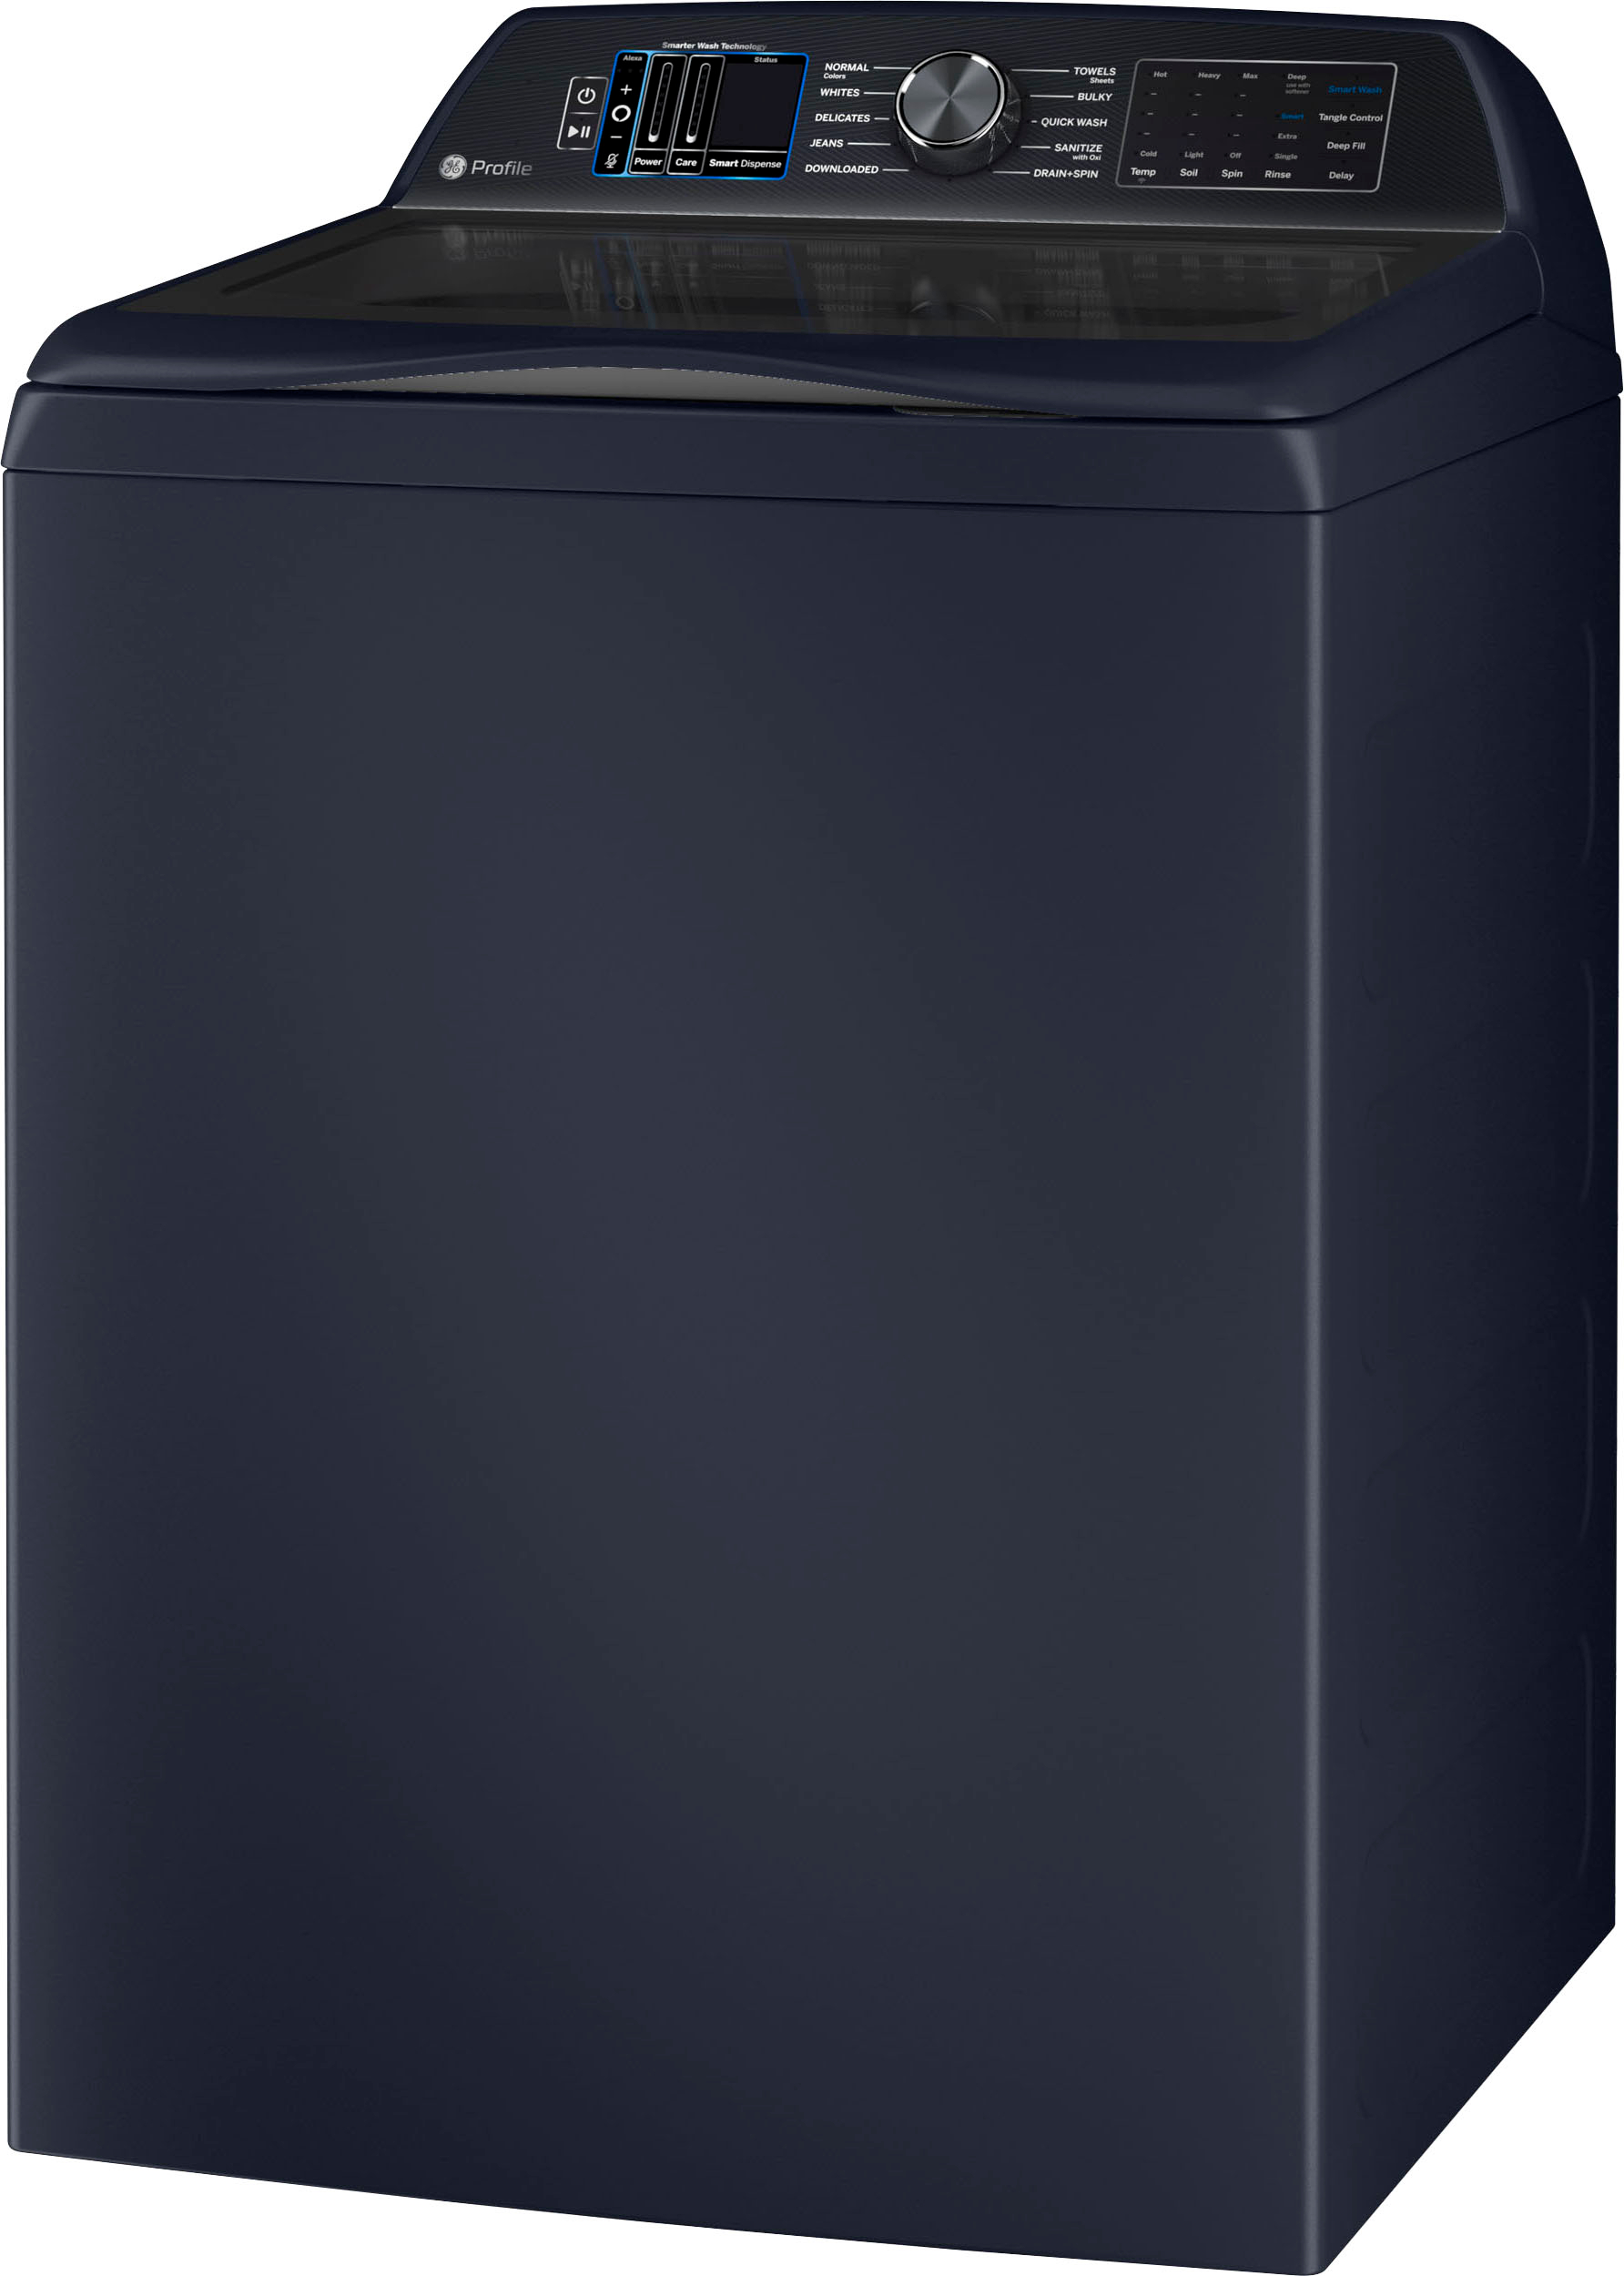 Left View: GE Profile - 5.3 Cu. Ft. High Efficiency Top Load Washer with Smarter Wash Technology, Easier Reach & Microban Technology - Sapphire Blue